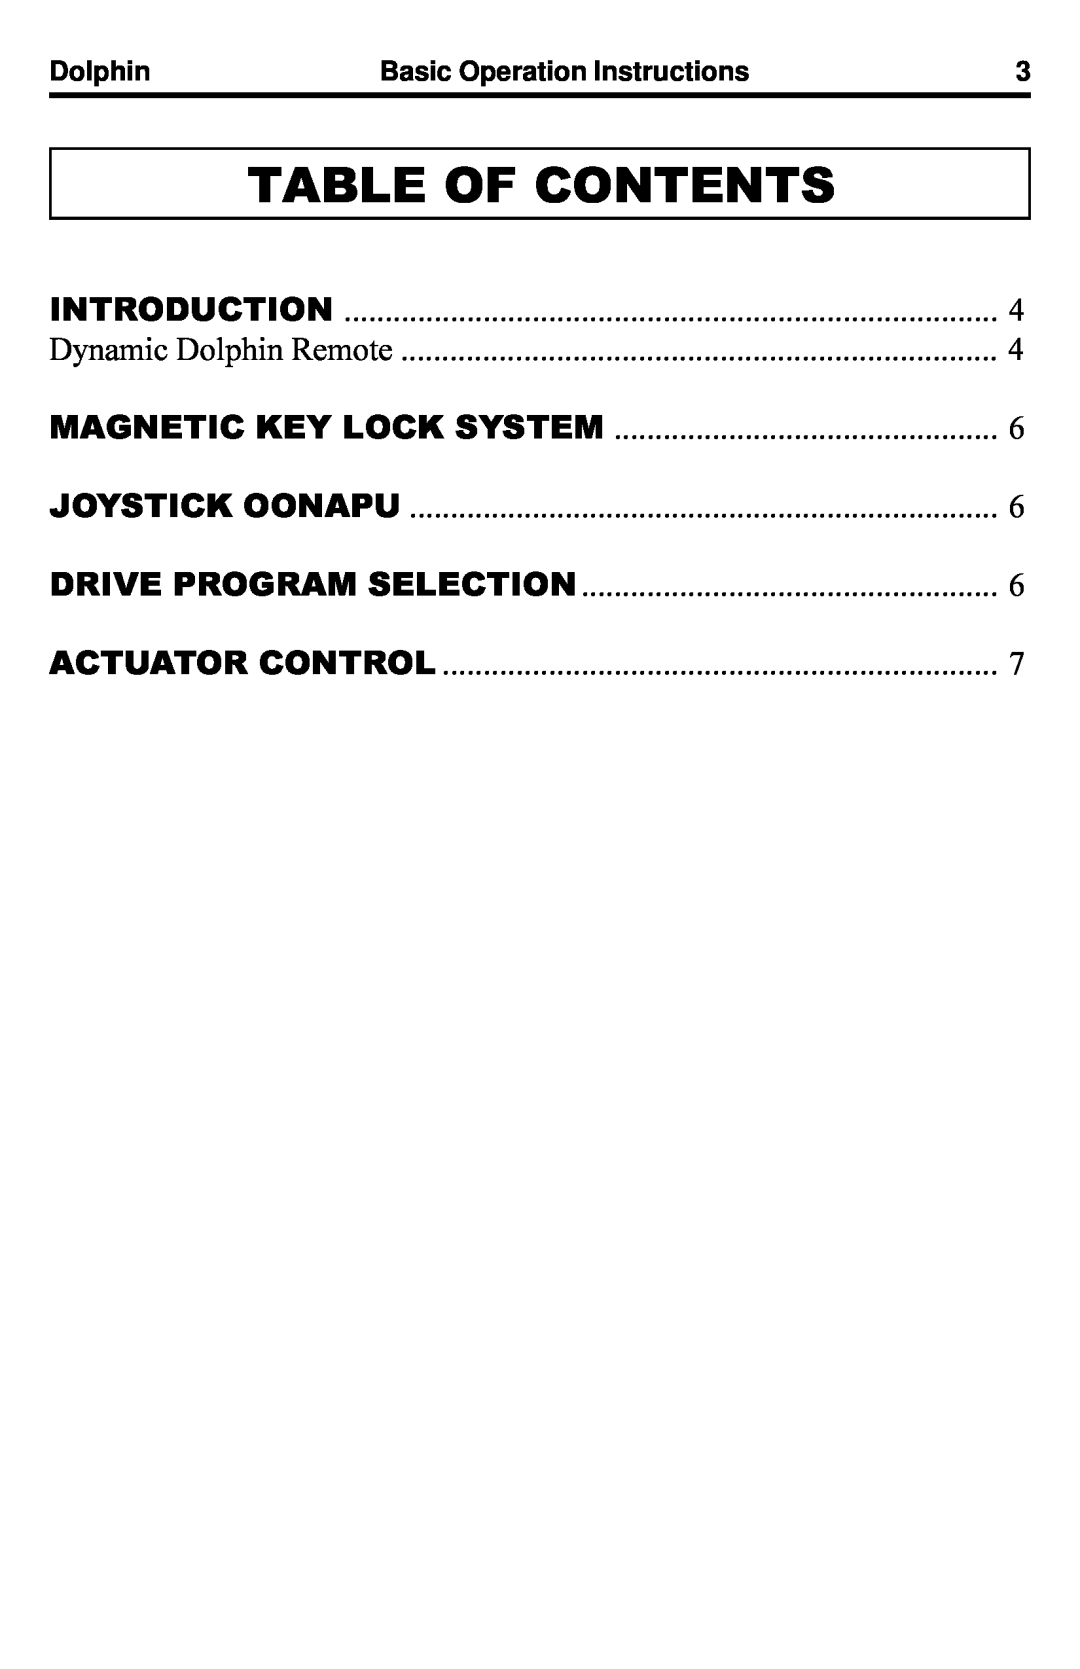 Quantum Dynamic Dolphin Remote manual Table Of Contents 